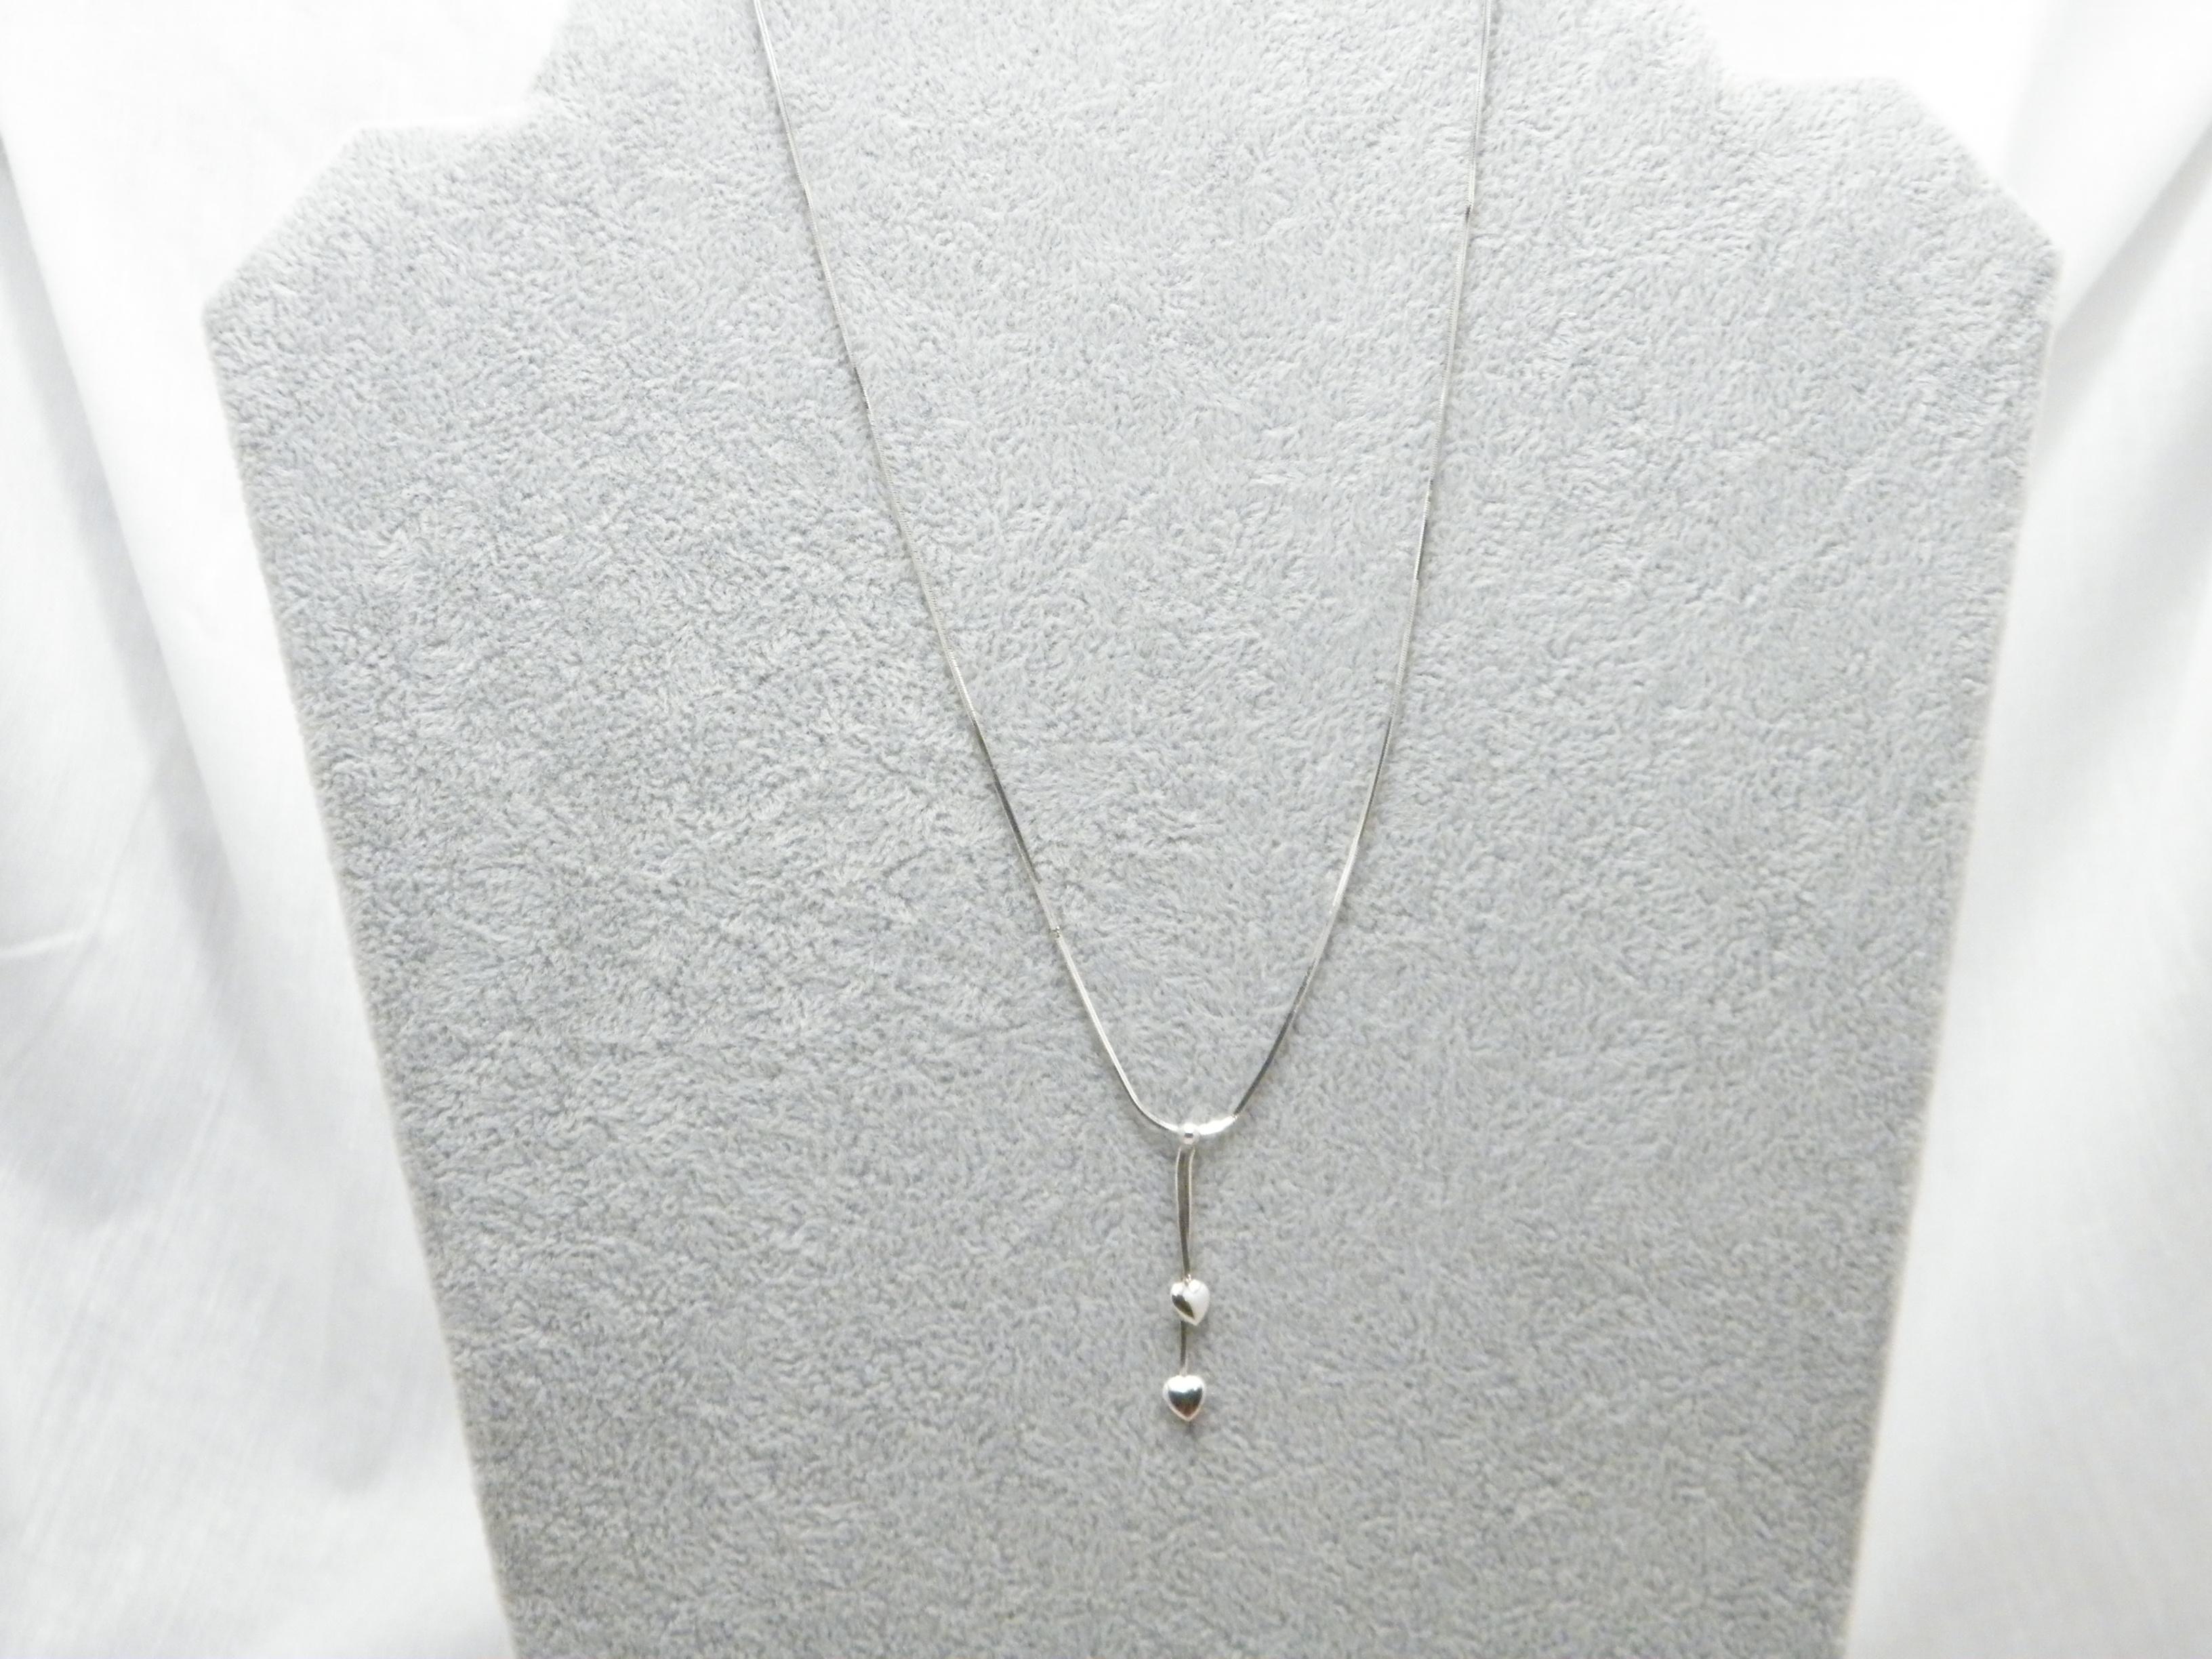 Contemporary Vintage 9ct White Gold Twin Heart Lariat Pendant Necklace 16 Inch Snake Chain For Sale